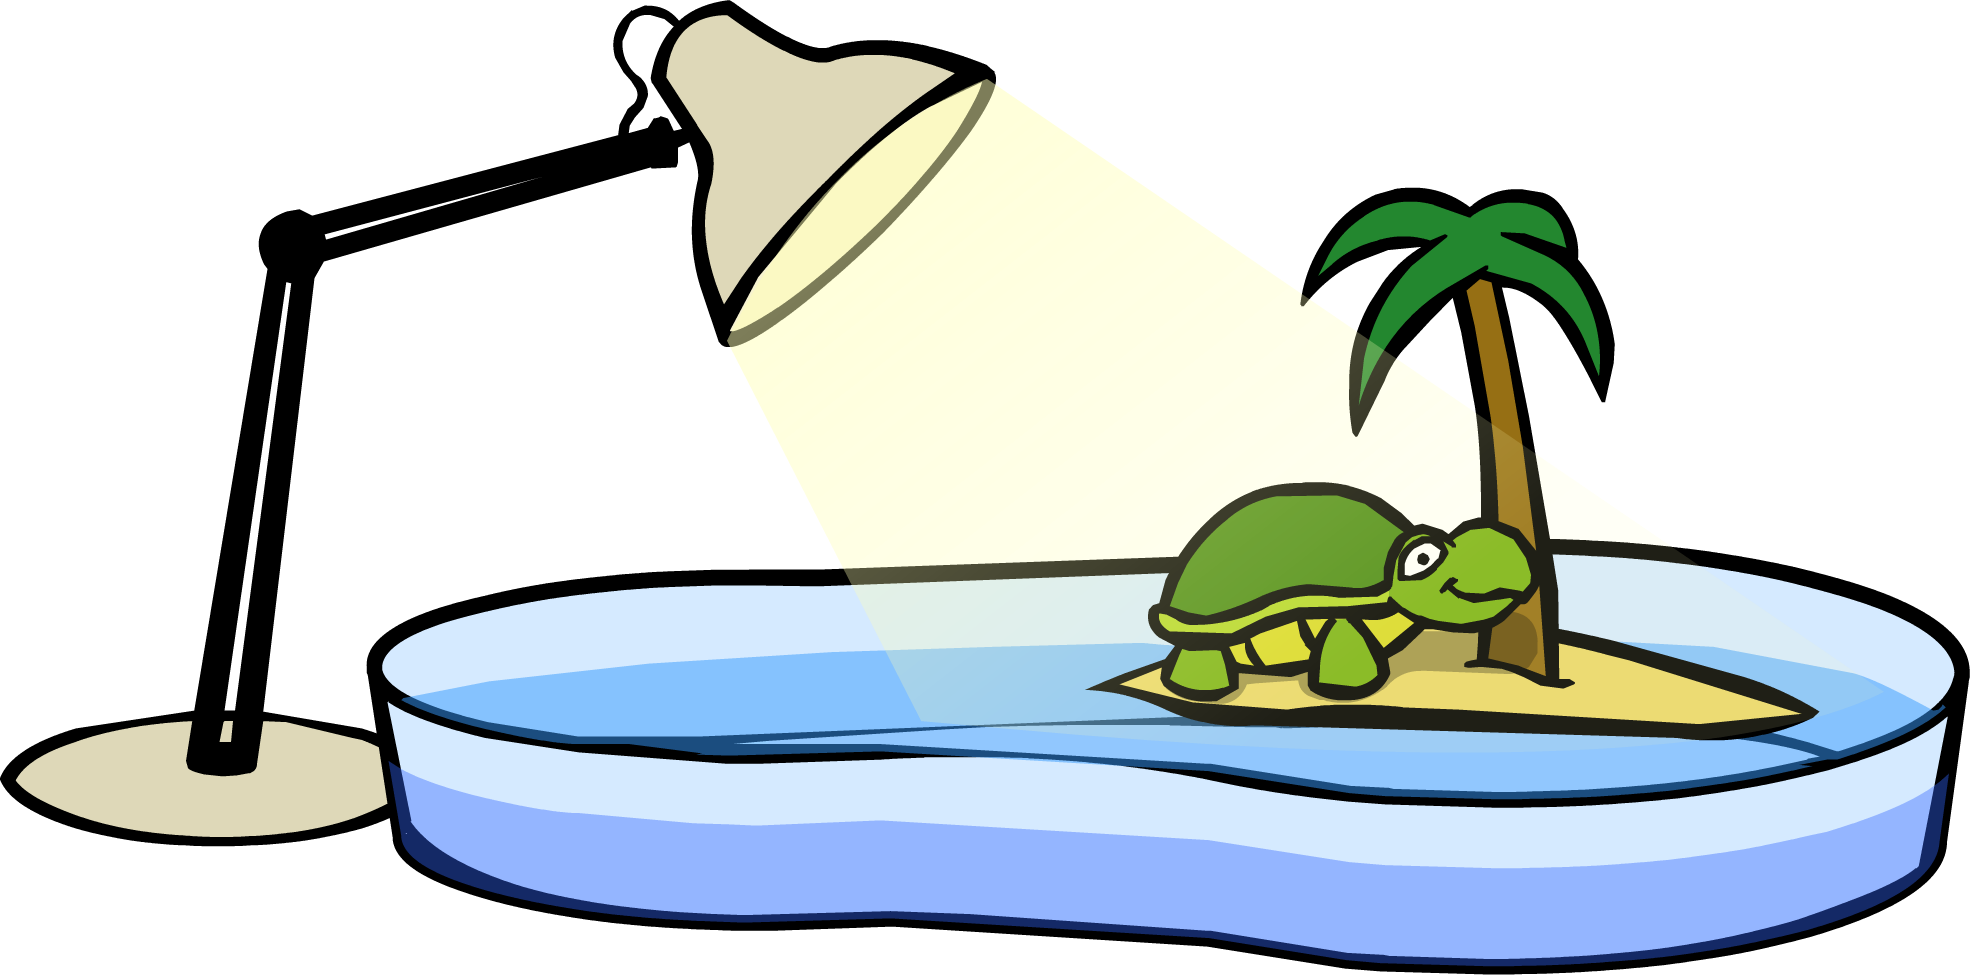 Turtle Bowl - Turtle In A Bowl (1970x975)